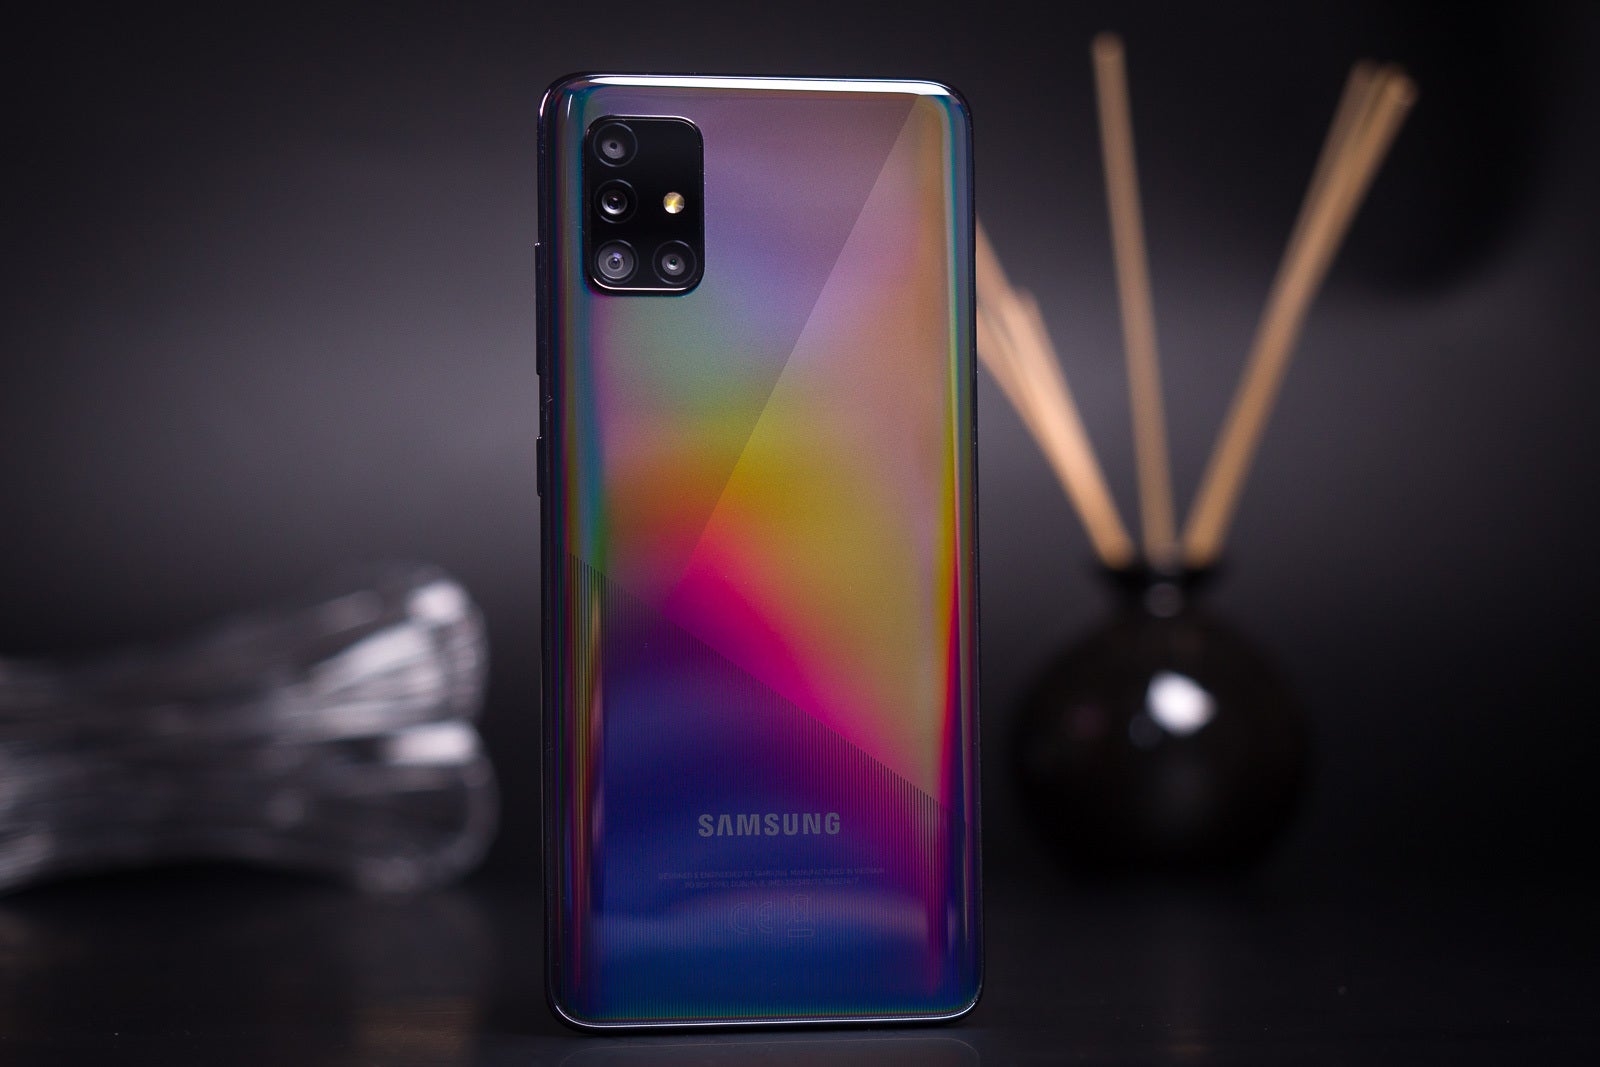  The Samsung Galaxy A51 - The iPhone 11 &amp; iPhone SE outsold every other smartphone last quarter